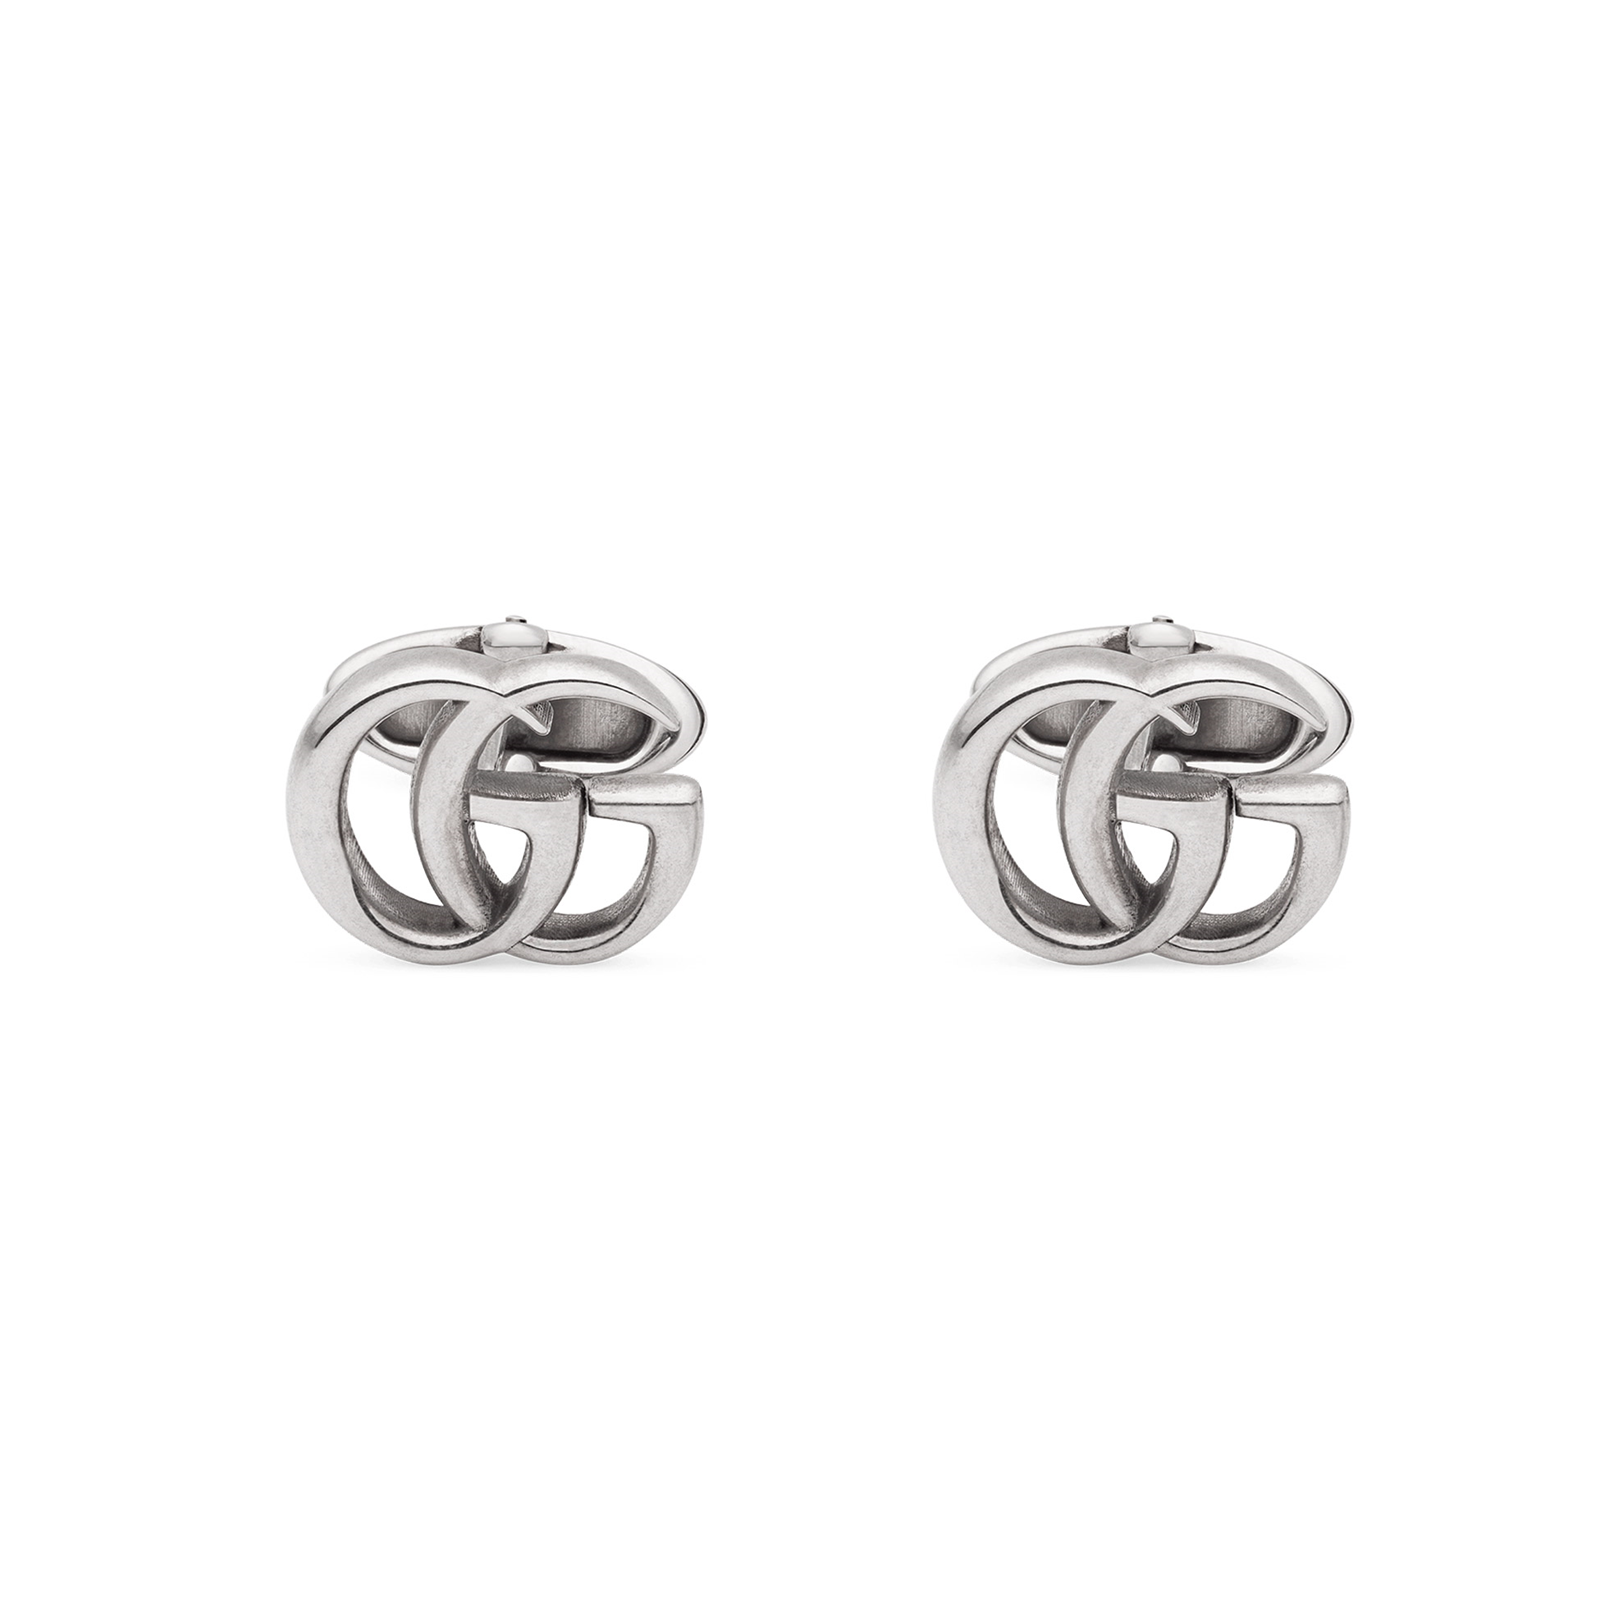 Gucci Silver Cufflinks with Double G 